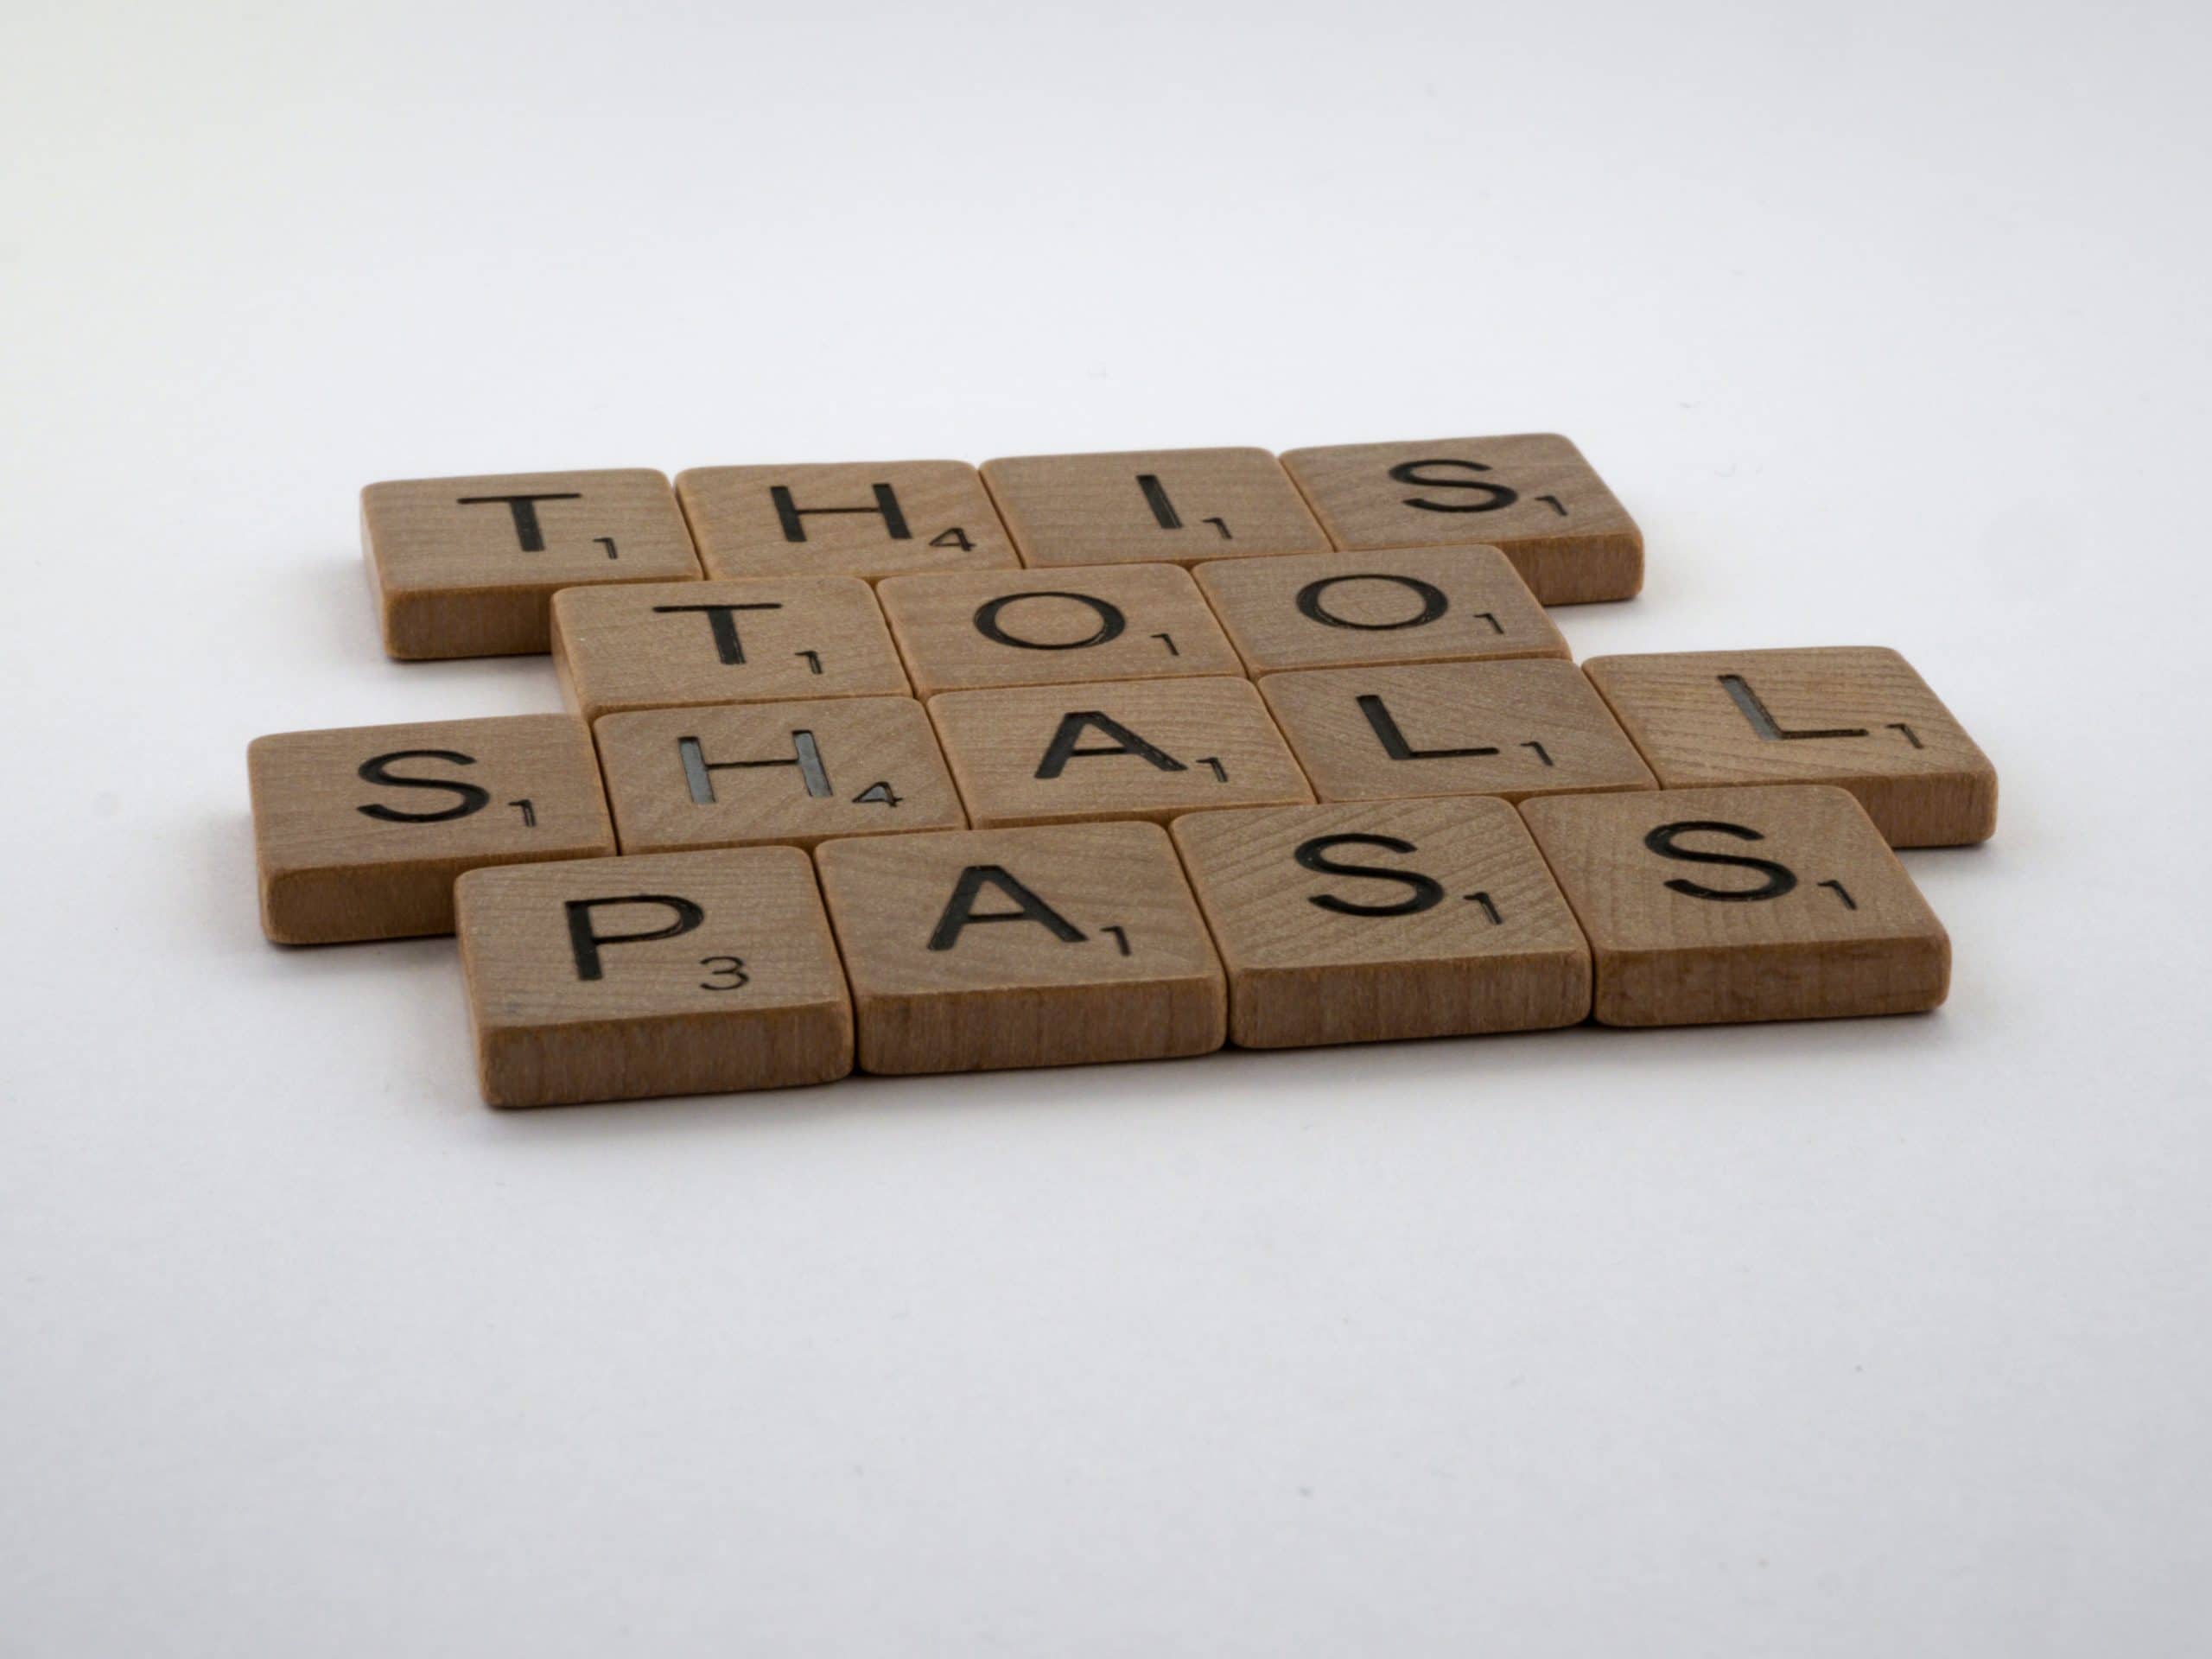 Photo of wooden letter tiles spelling out the advice "this too shall pass"